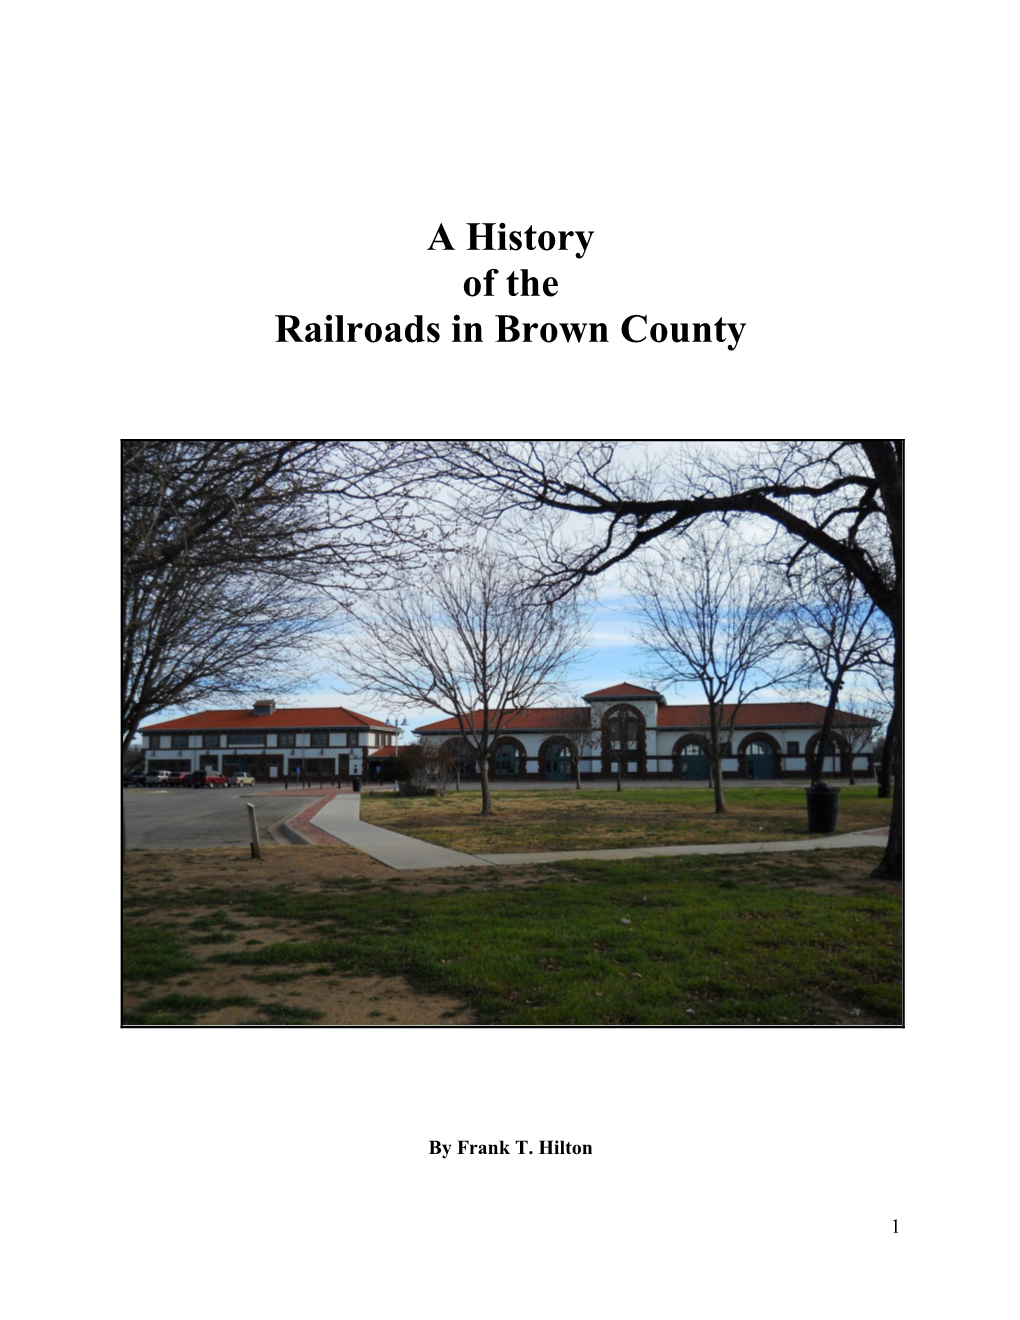 A History of the Railroads in Brown County